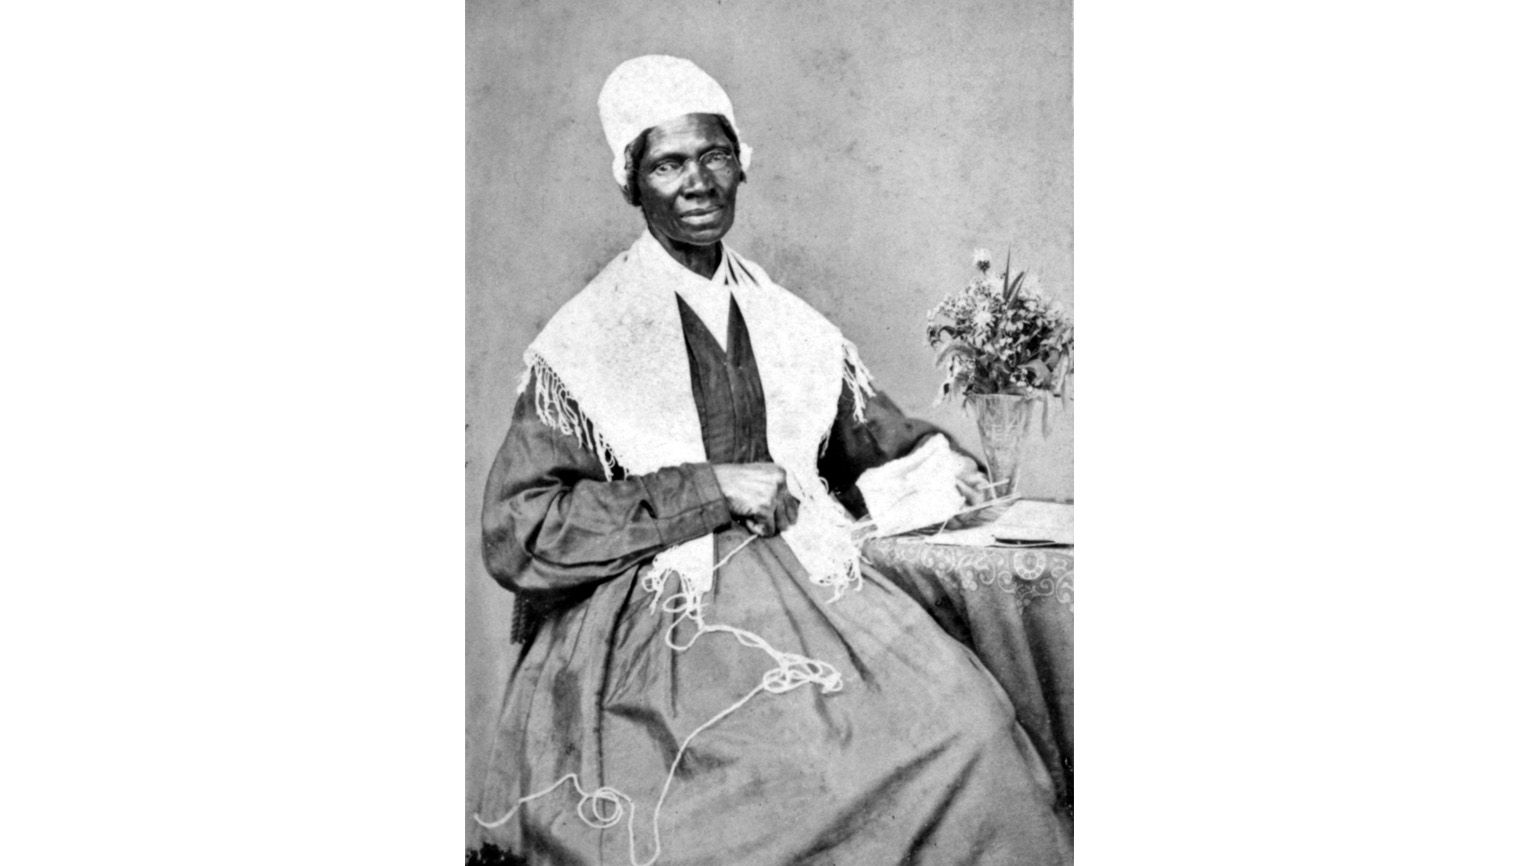 Sojourner Truth sits in a chair as an inspiring person for Black History Month